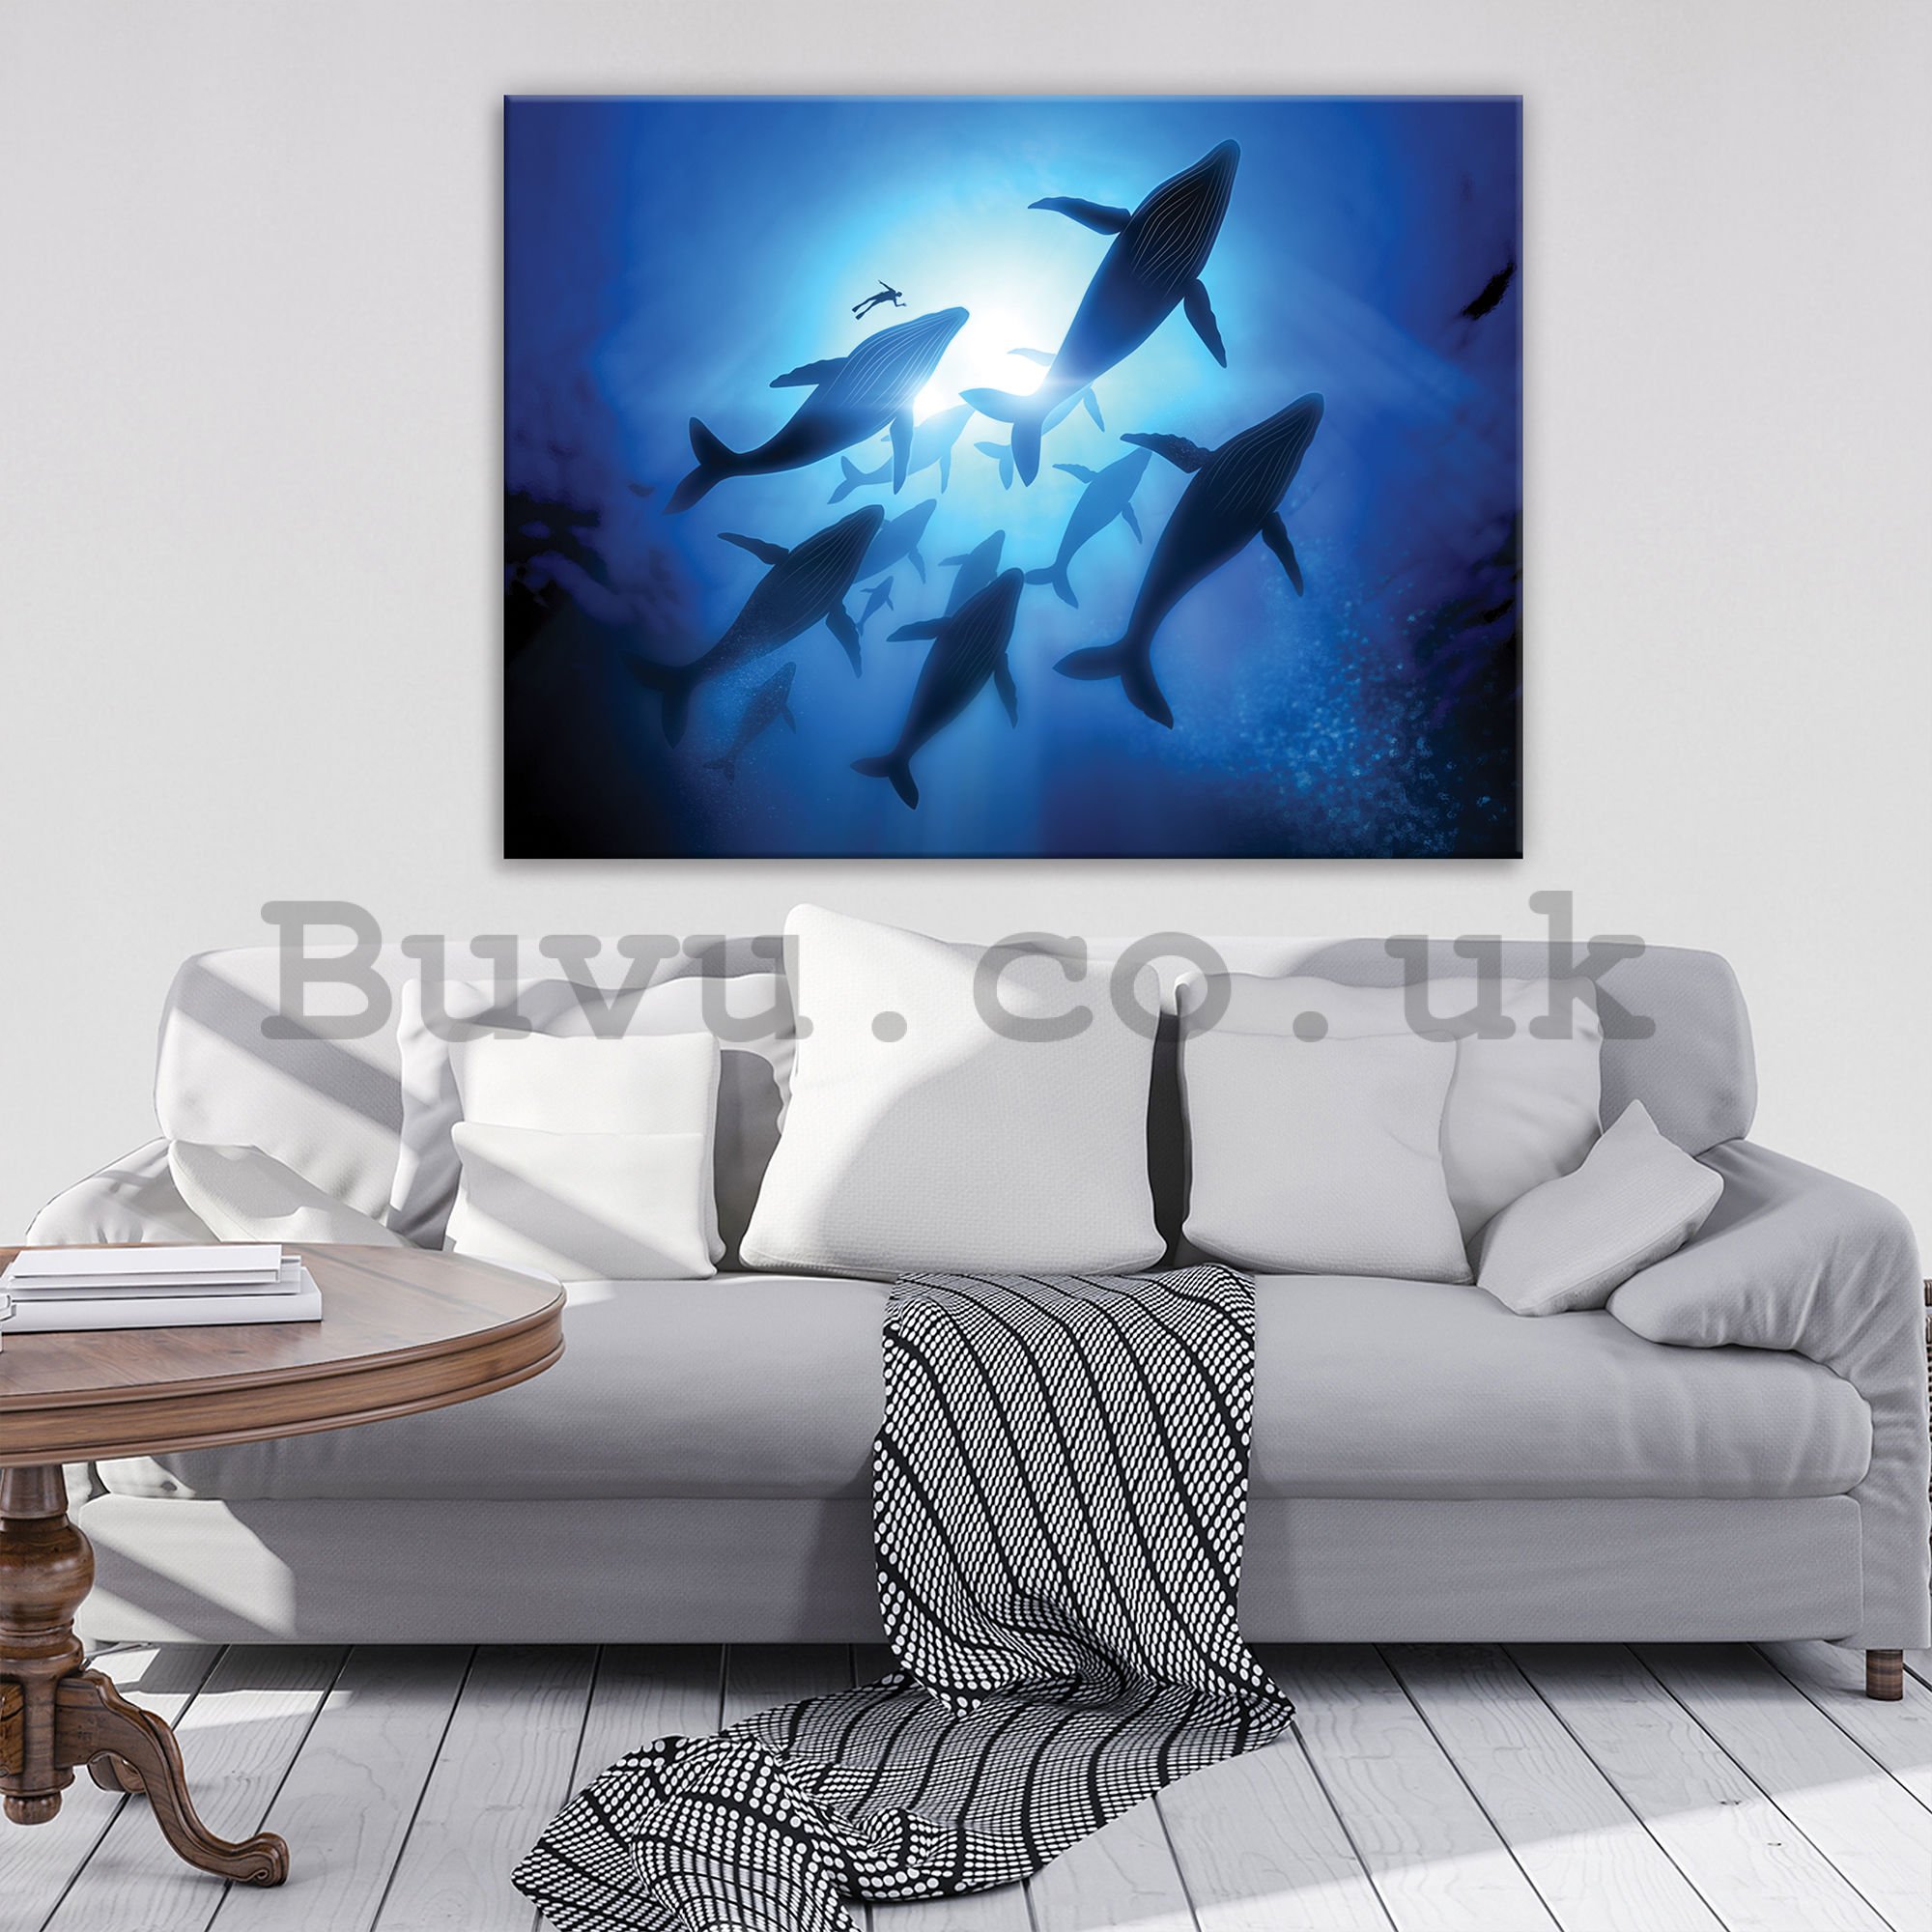 Painting on canvas: Whales (1) - 75x100 cm